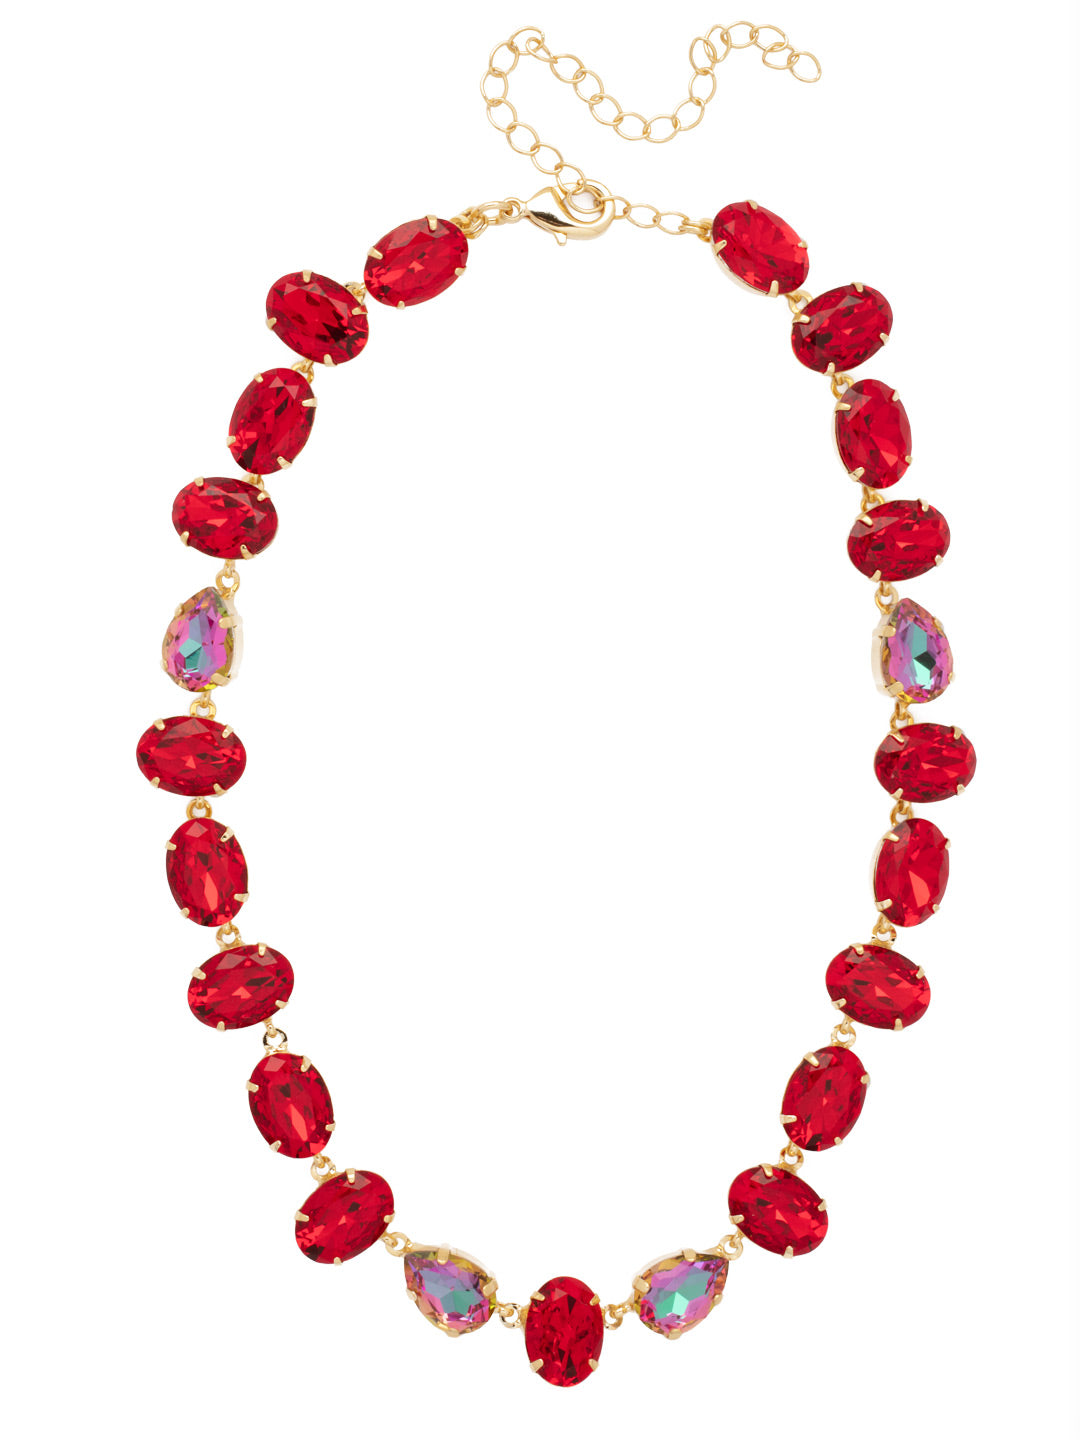 Michelle Statement Necklace - NFL10BGFIS - <p>The Michelle Statement Necklace features alternating pear and oval cut crystals on an adjustable chain, secured with a lobster claw clasp. From Sorrelli's Fireside collection in our Bright Gold-tone finish.</p>